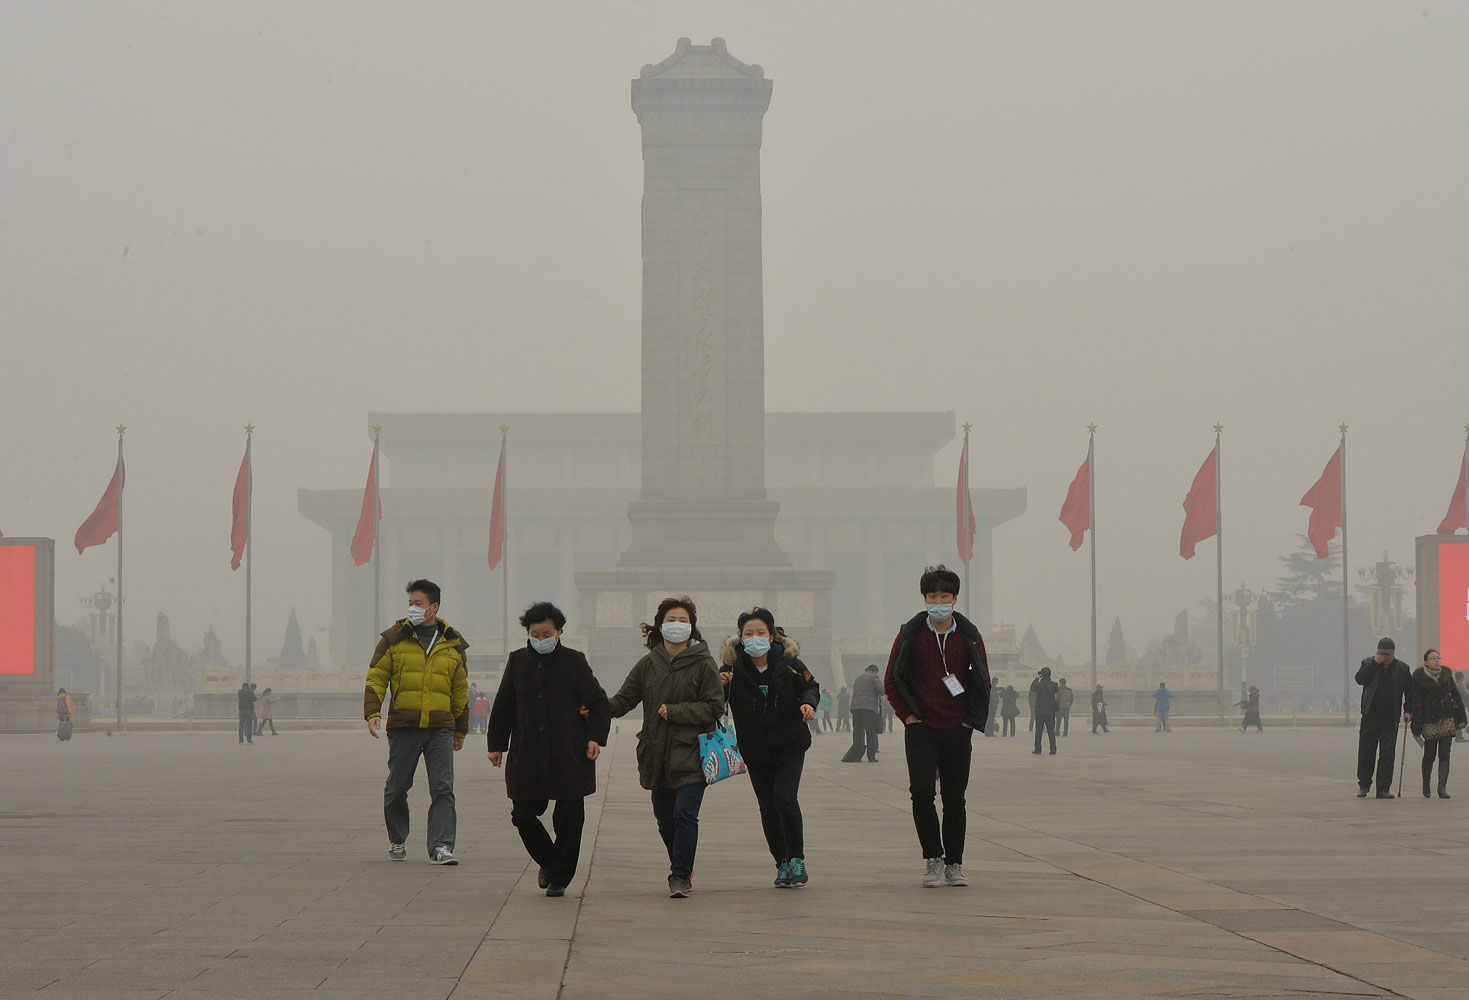 People wearing face masks visit Tiananmen Square as heavy air pollution shrouds Beijing on Feb. 26, 2014.